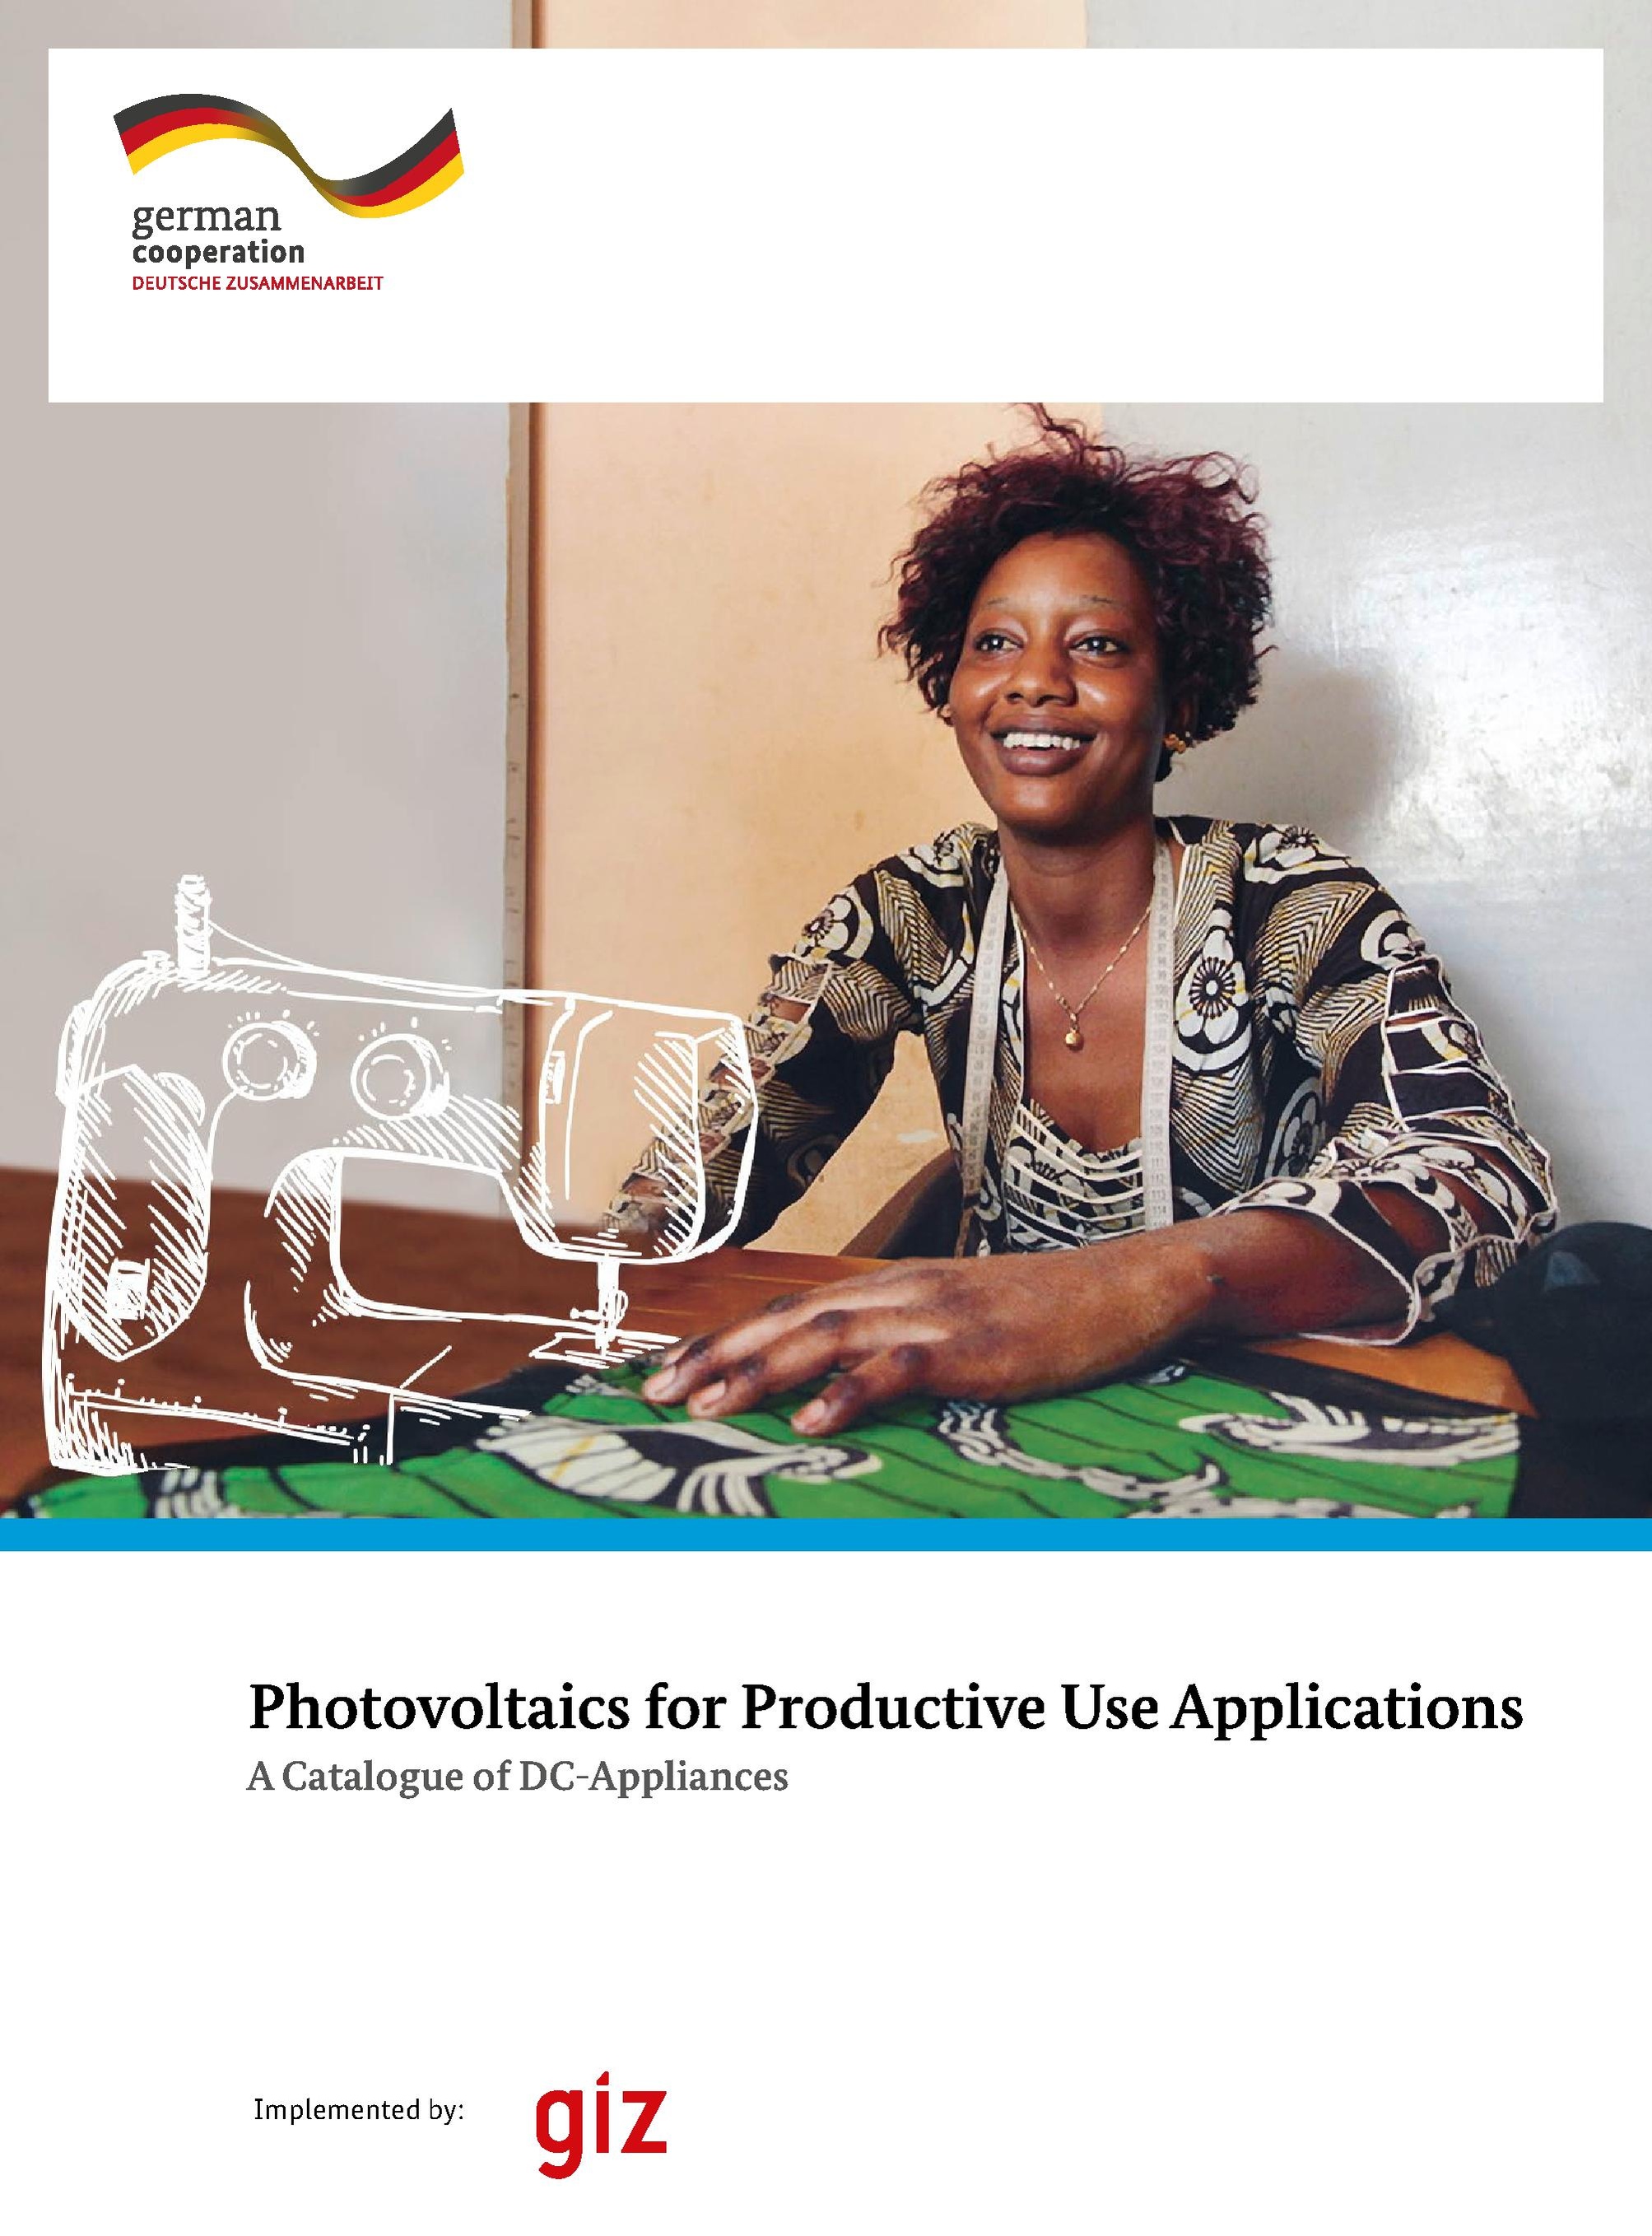 Catalogue of PV driven appliances for Productive Uses